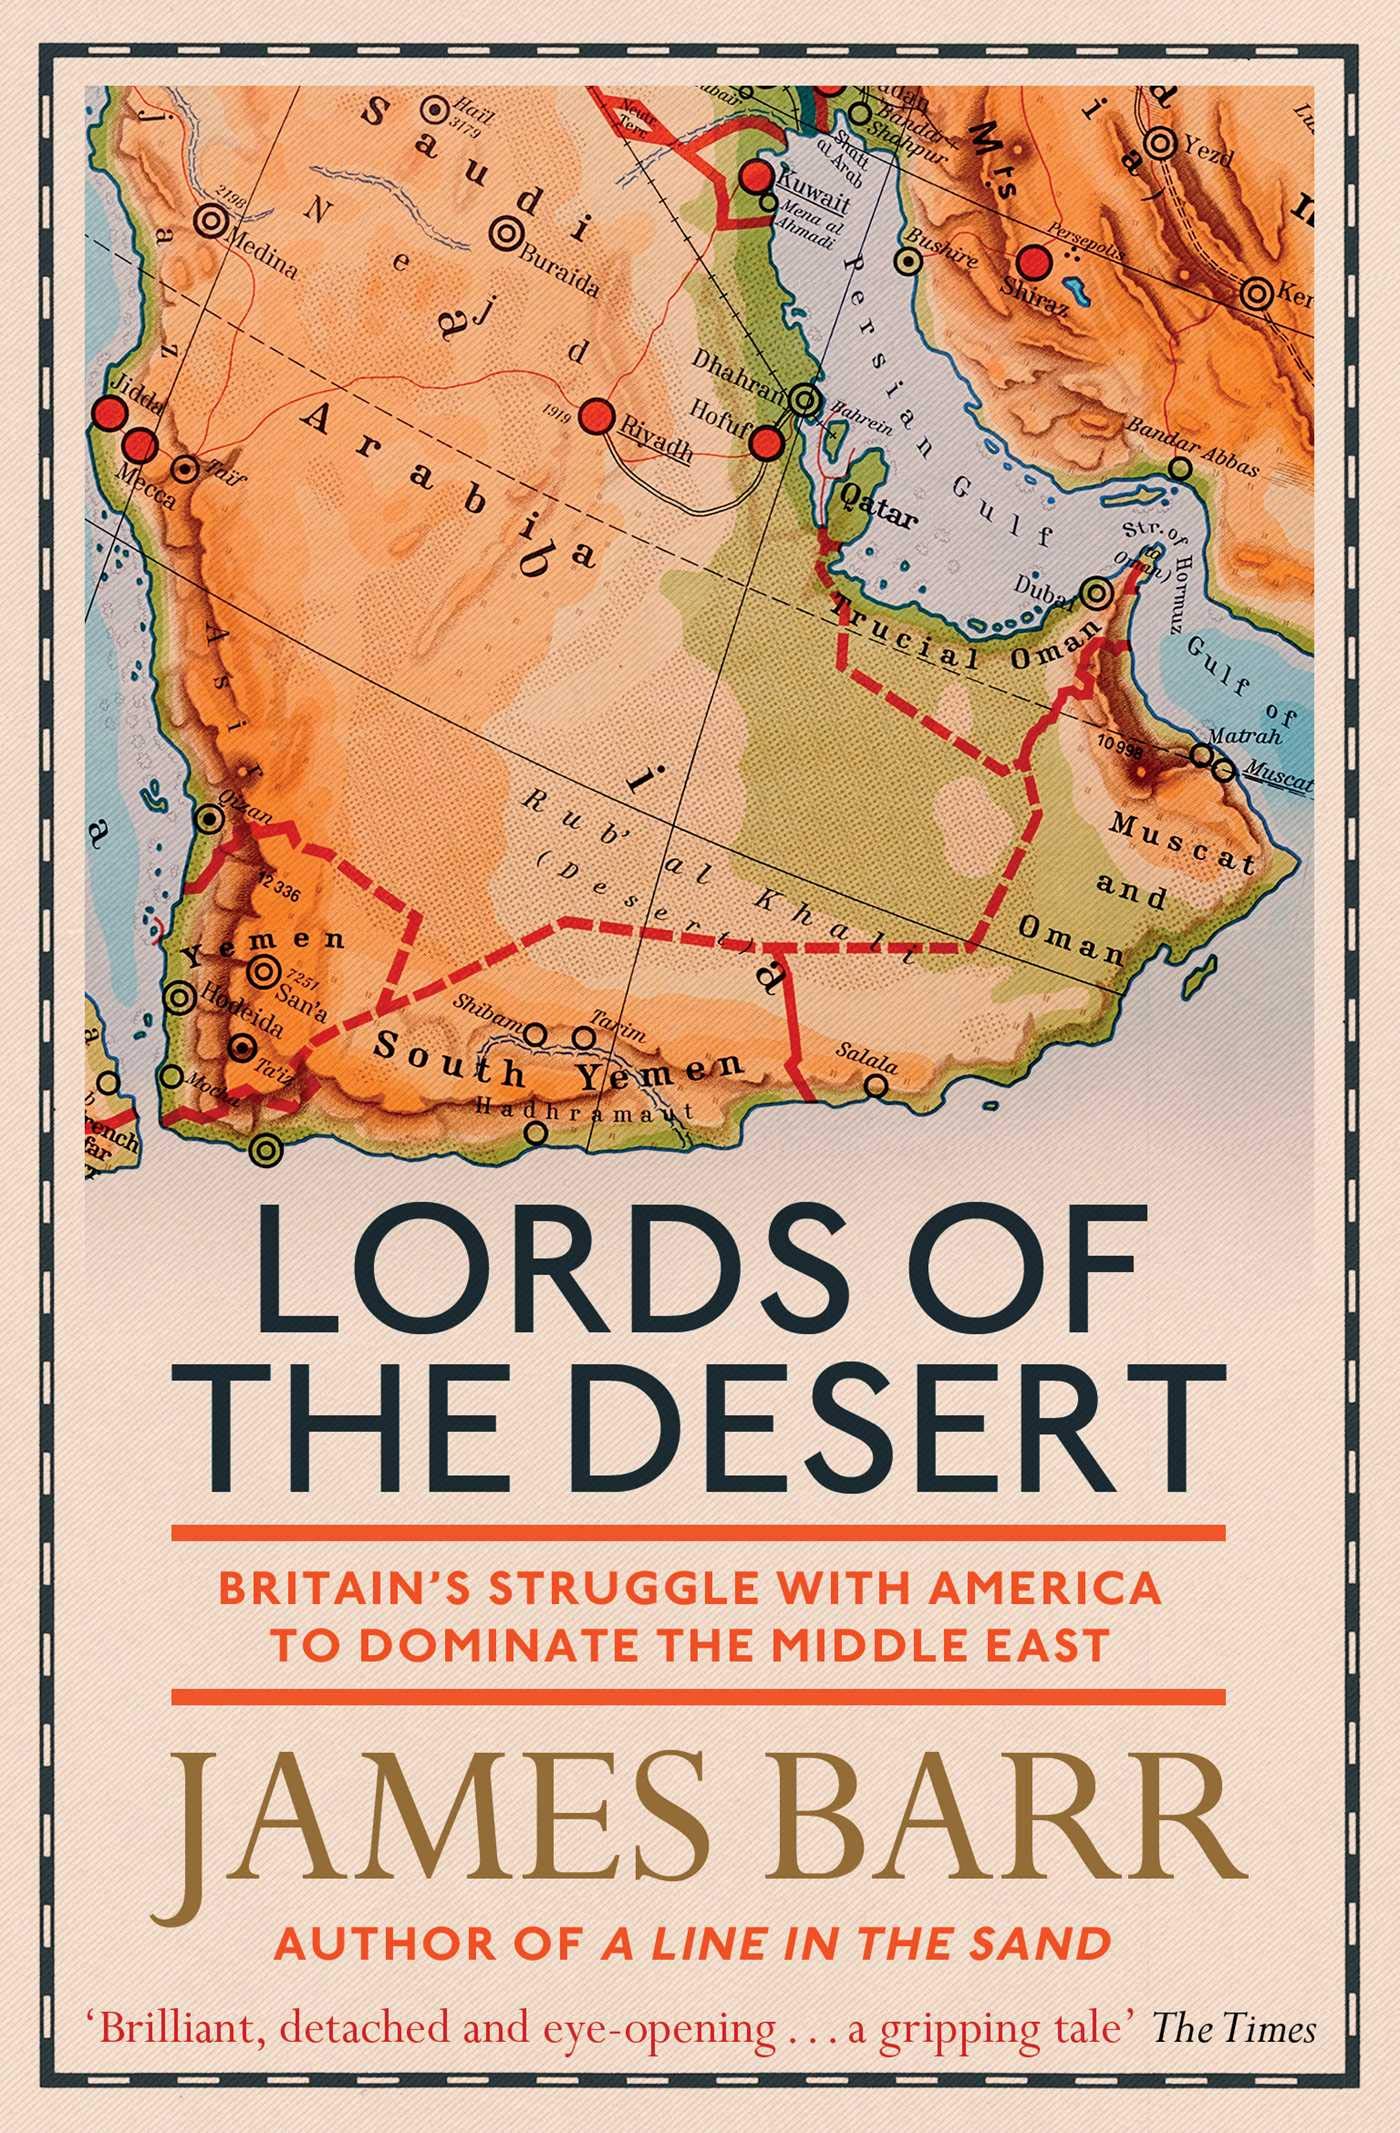 James Barr on "Lords Of The Desert": 'Archived files suggesting that the British spied on American politicians visiting Palestine in the late 1940s piqued my interest and inspired my latest book'